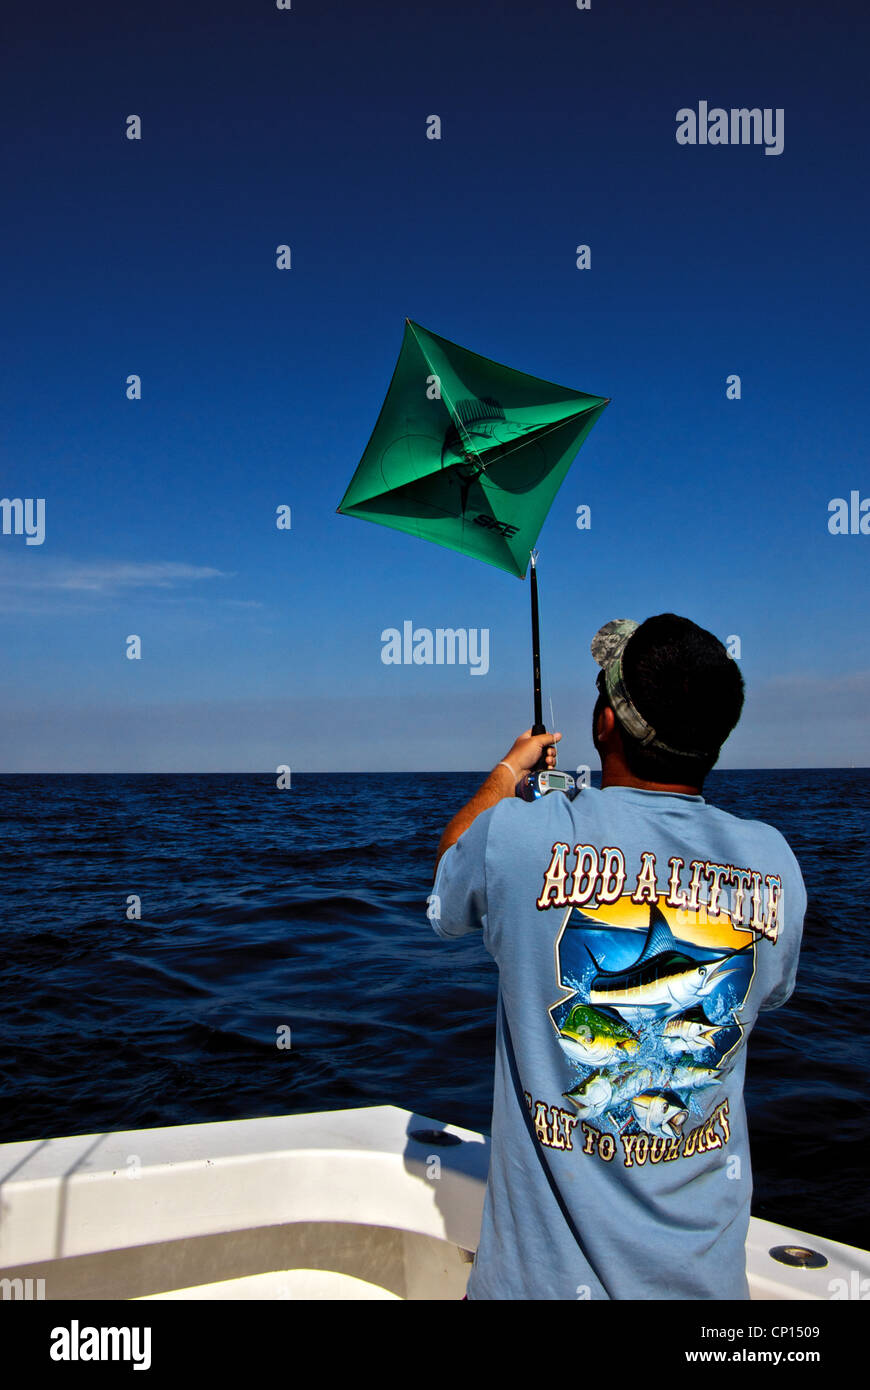 https://c8.alamy.com/comp/CP1509/deckhand-readying-small-kite-on-short-rod-for-fishing-live-bait-rig-CP1509.jpg